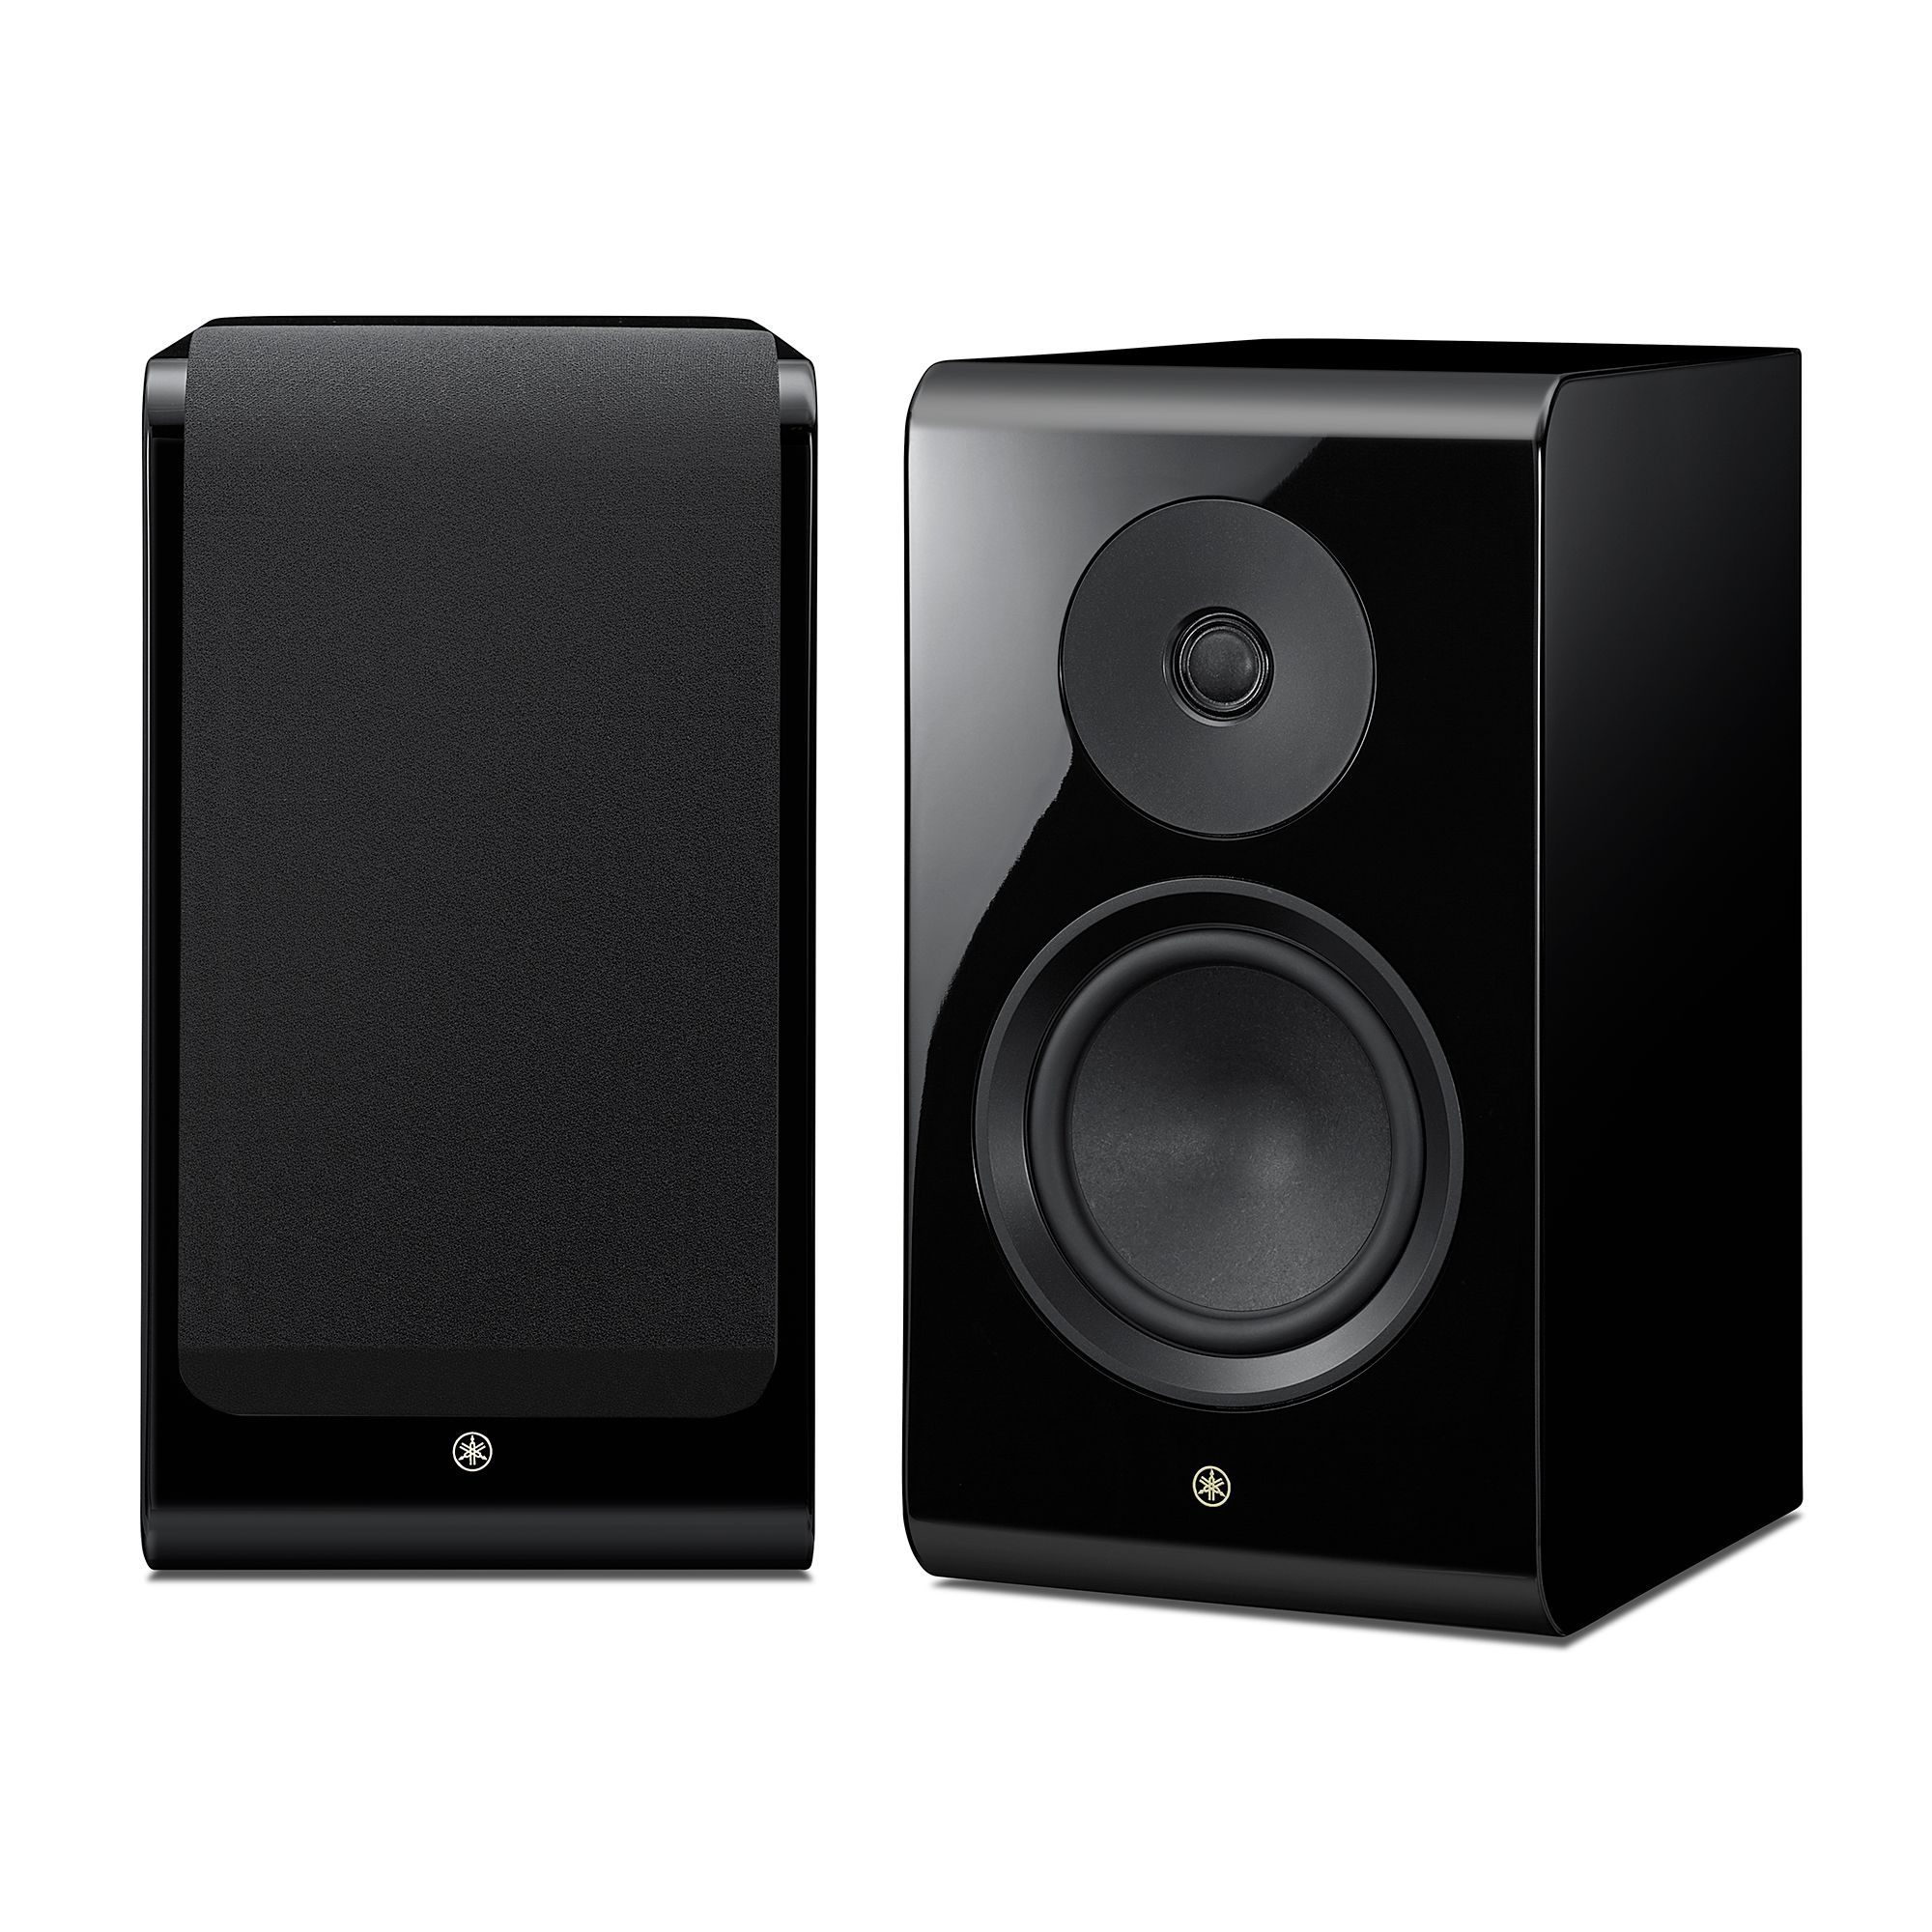 Speaker Systems - Audio & Visual - Products - Yamaha - Other 